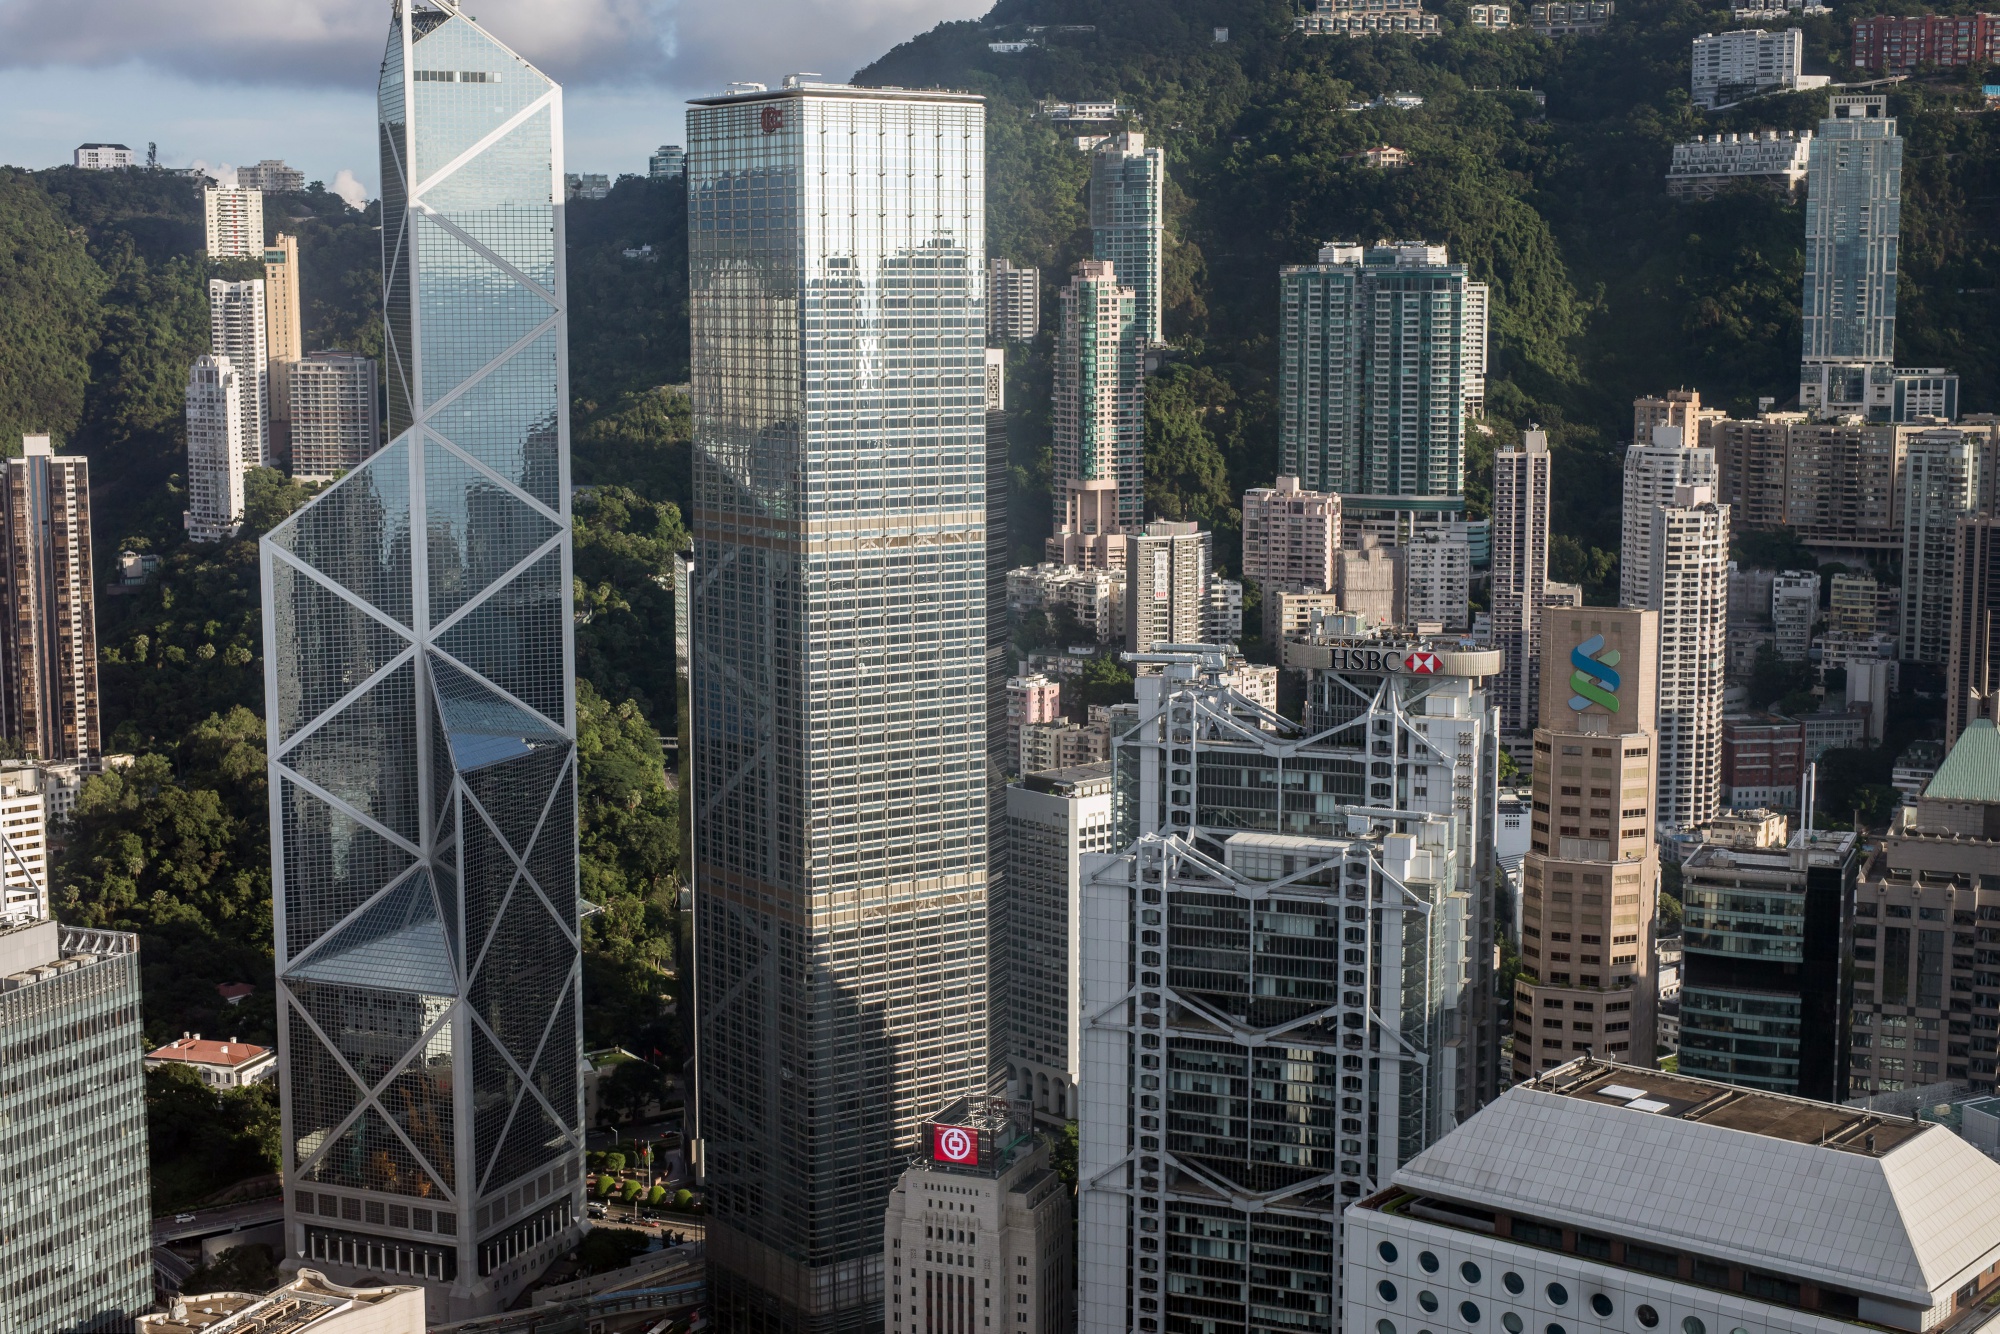 The Bank of China Tower, from left, the Cheung Kong Center building, the HSBC Holdings Plc headquarters building and the Standard Chartered Bank building stand in the central business district of Hong Kong.